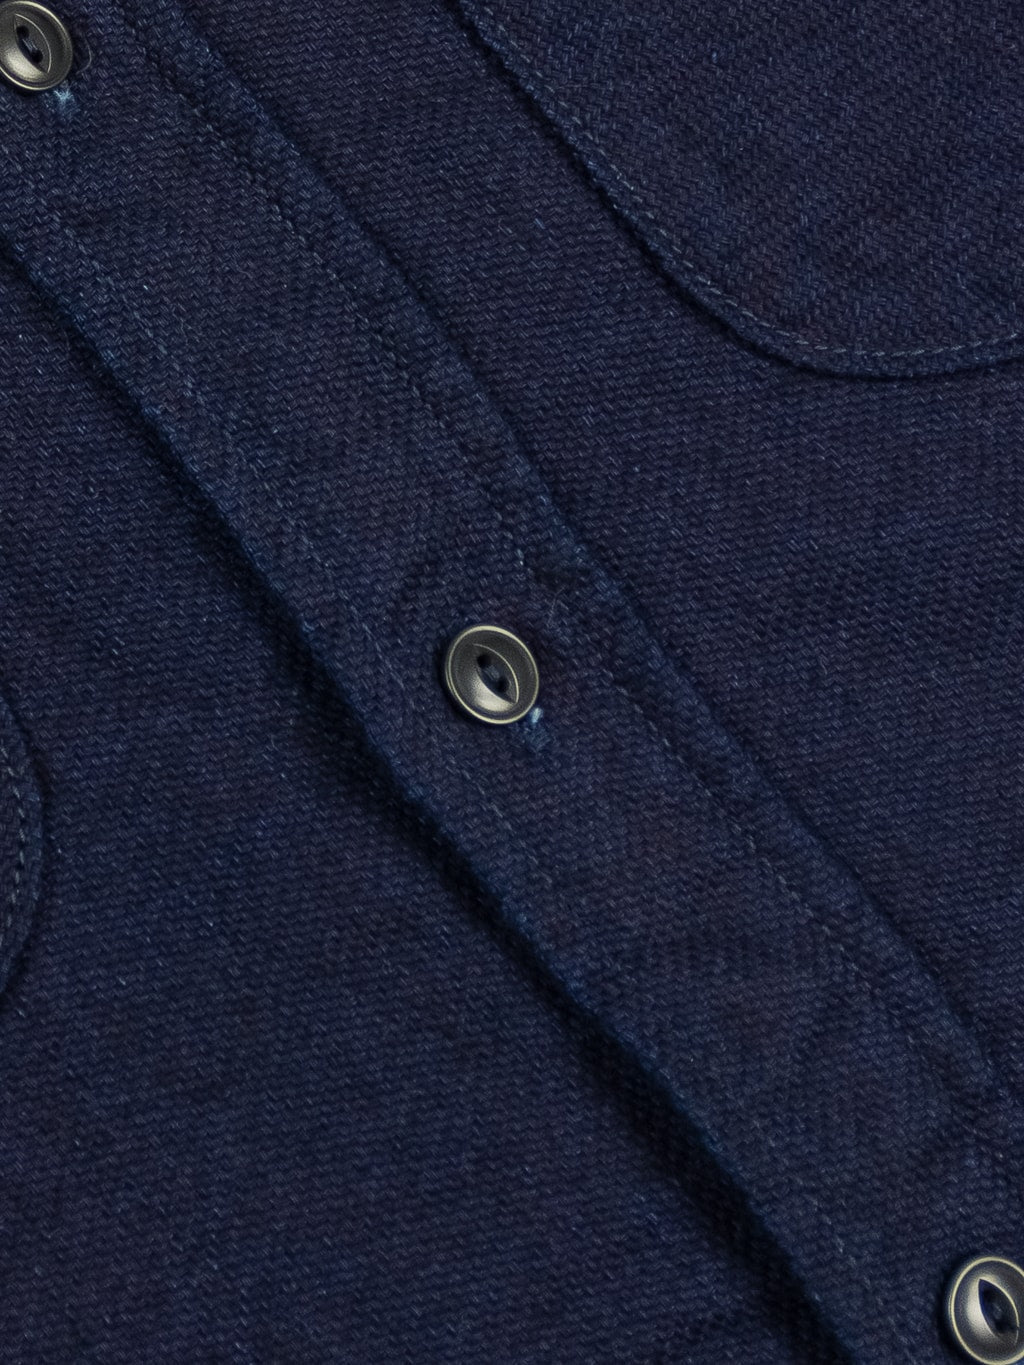 UES Indigo Heavy Selvedge Flannel Shirt front buttons detail